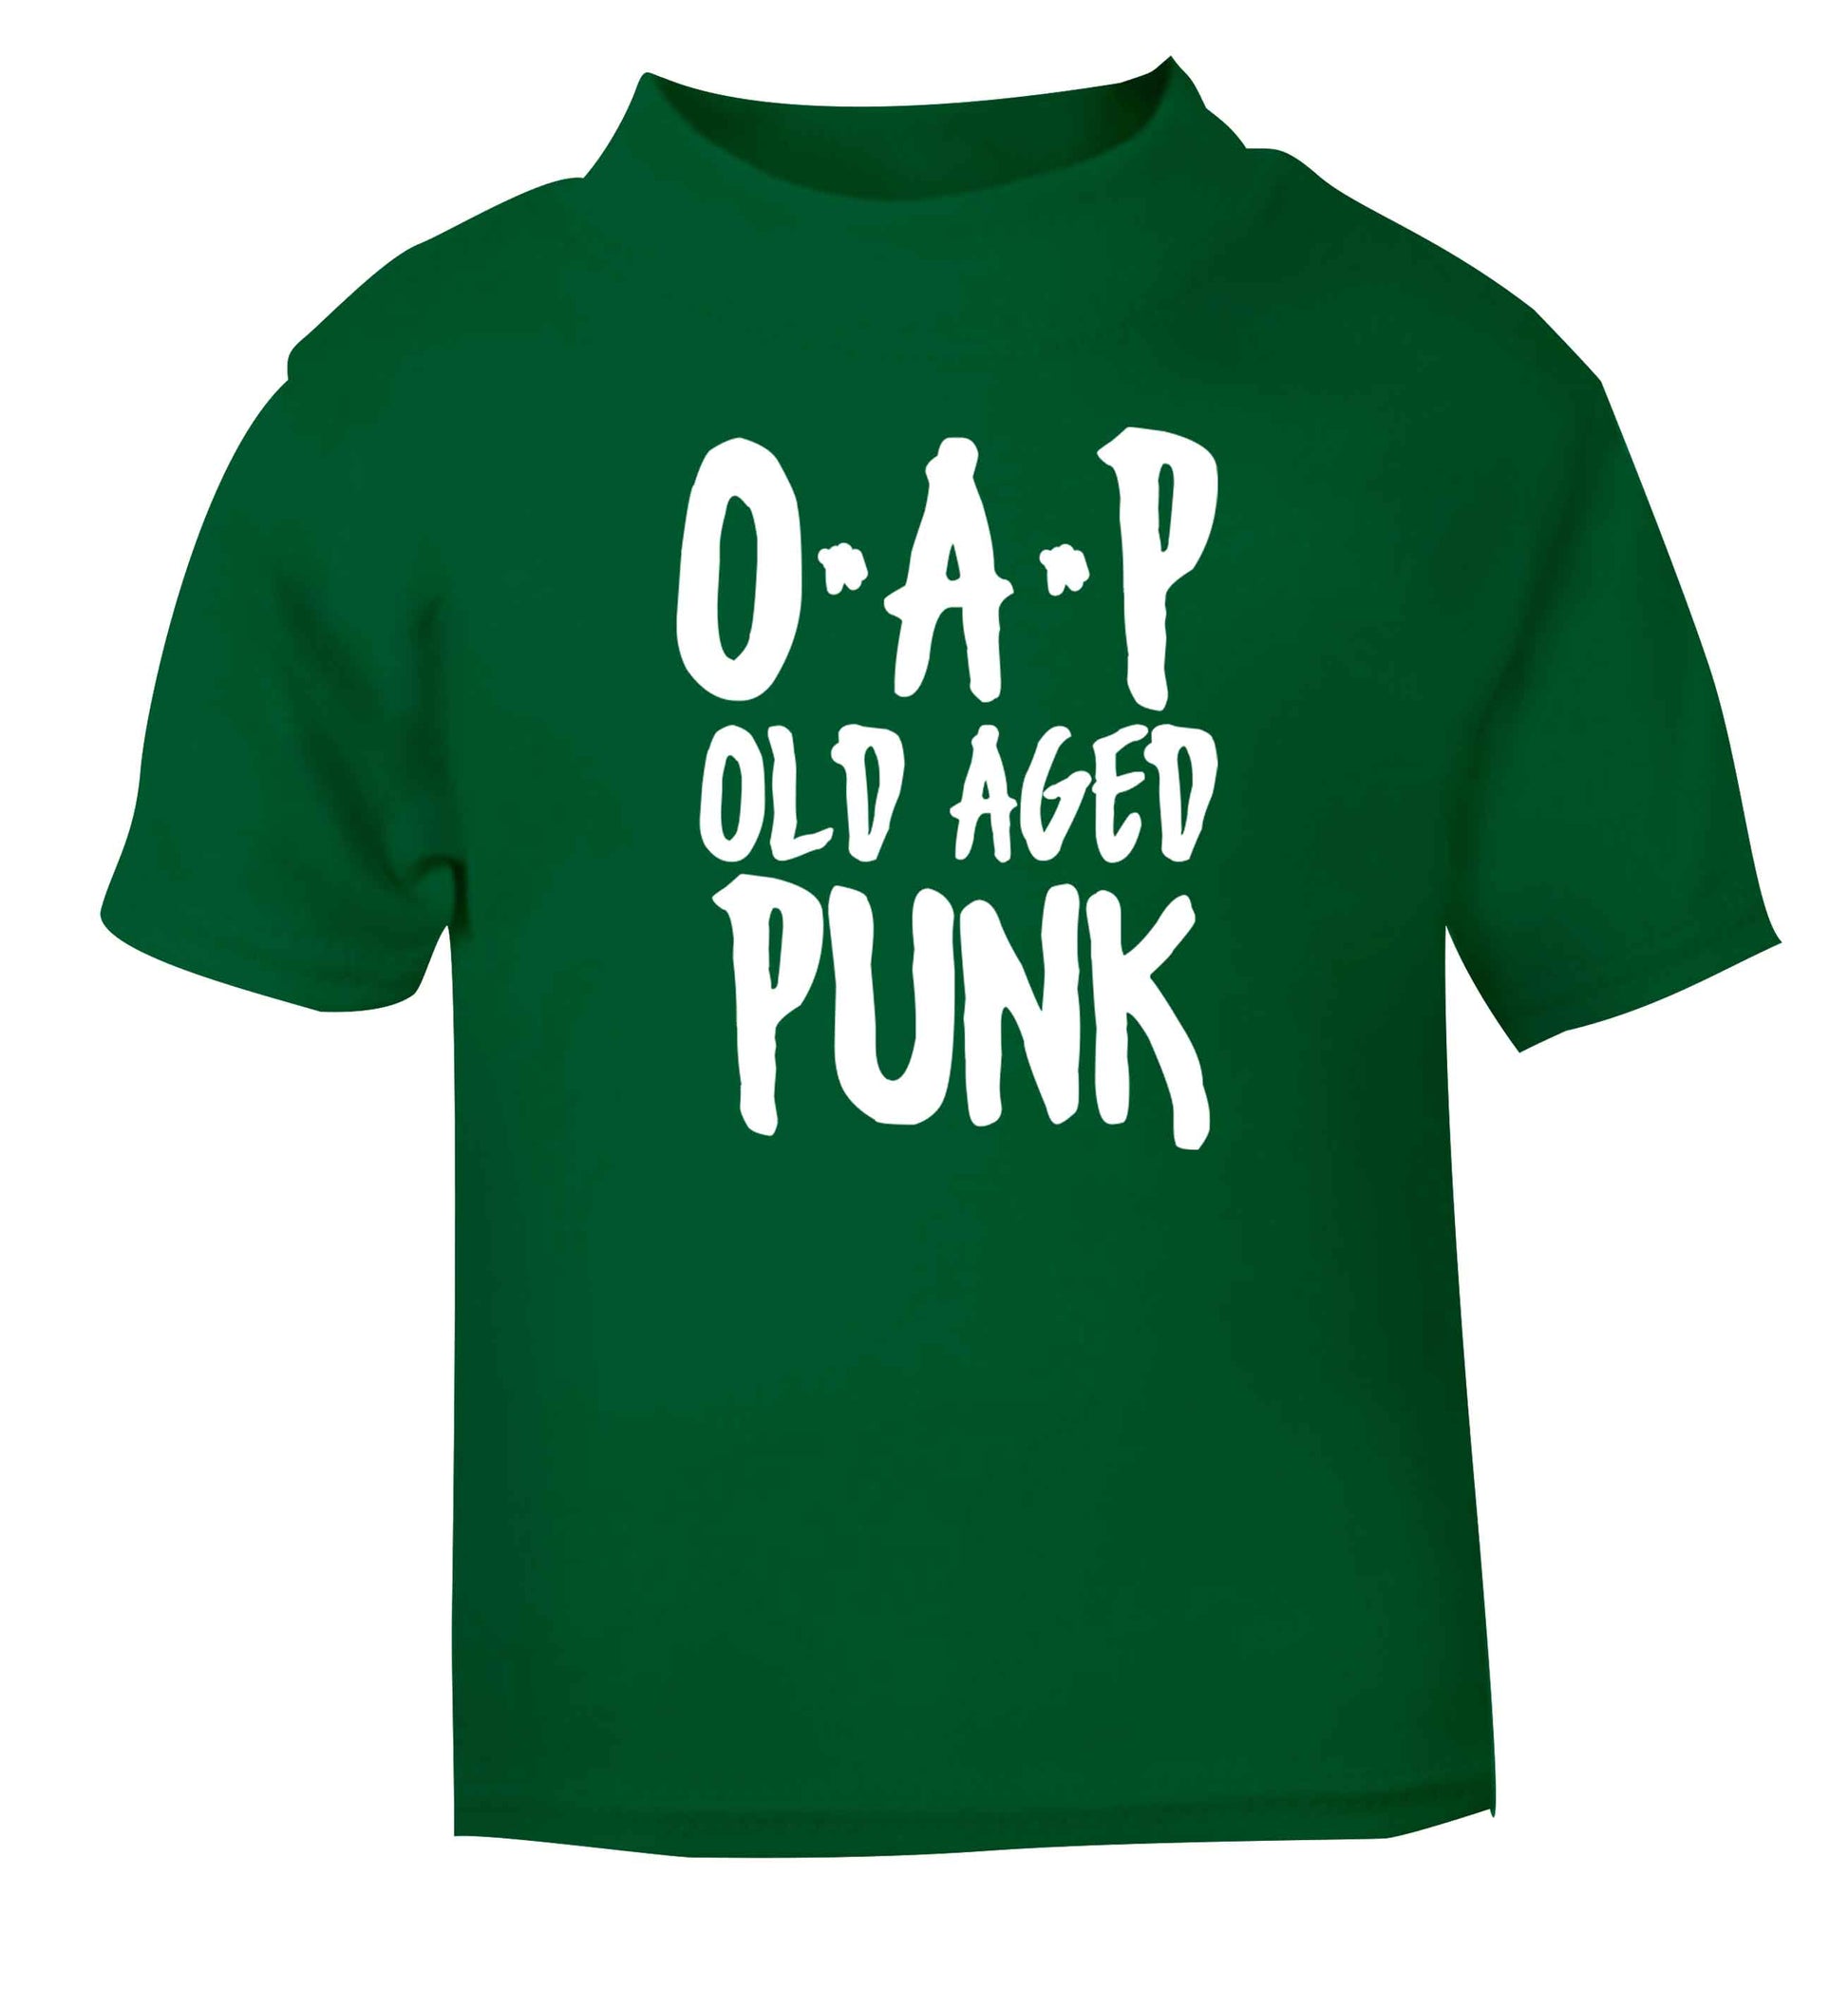 O.A.P Old Age Punk green Baby Toddler Tshirt 2 Years